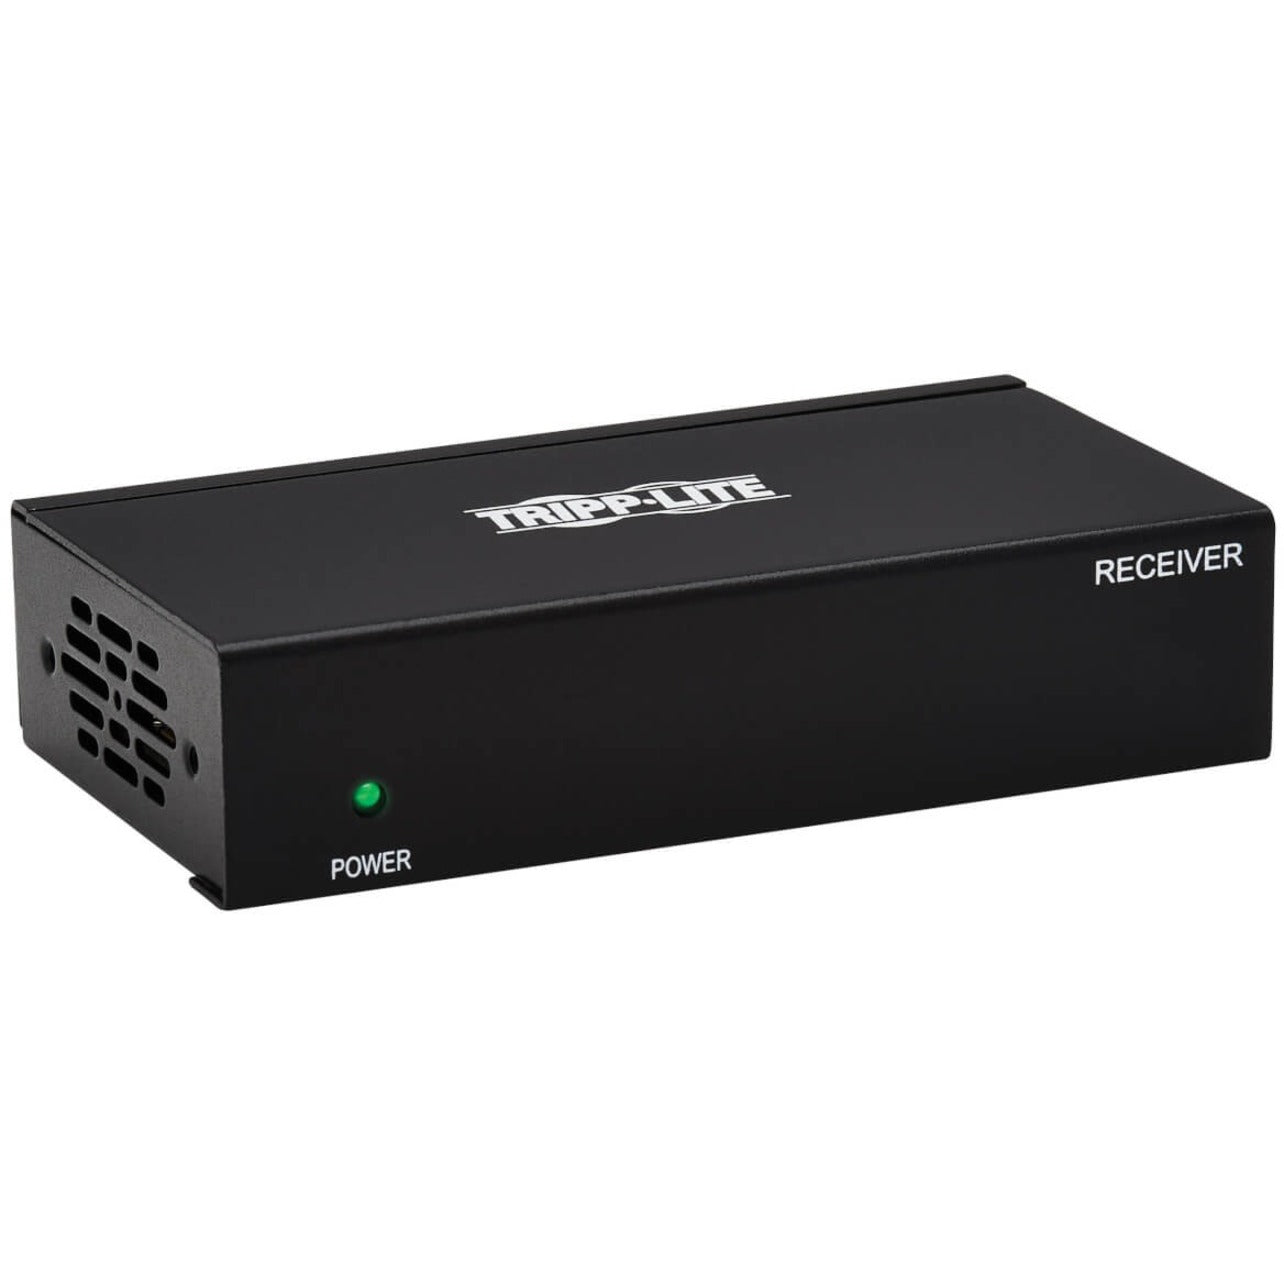 Tripp Lite B127-200-H 2-Port HDMI over Cat6 Active Remote Receiver, 4K Video, 1 Year Warranty, TAA Compliant